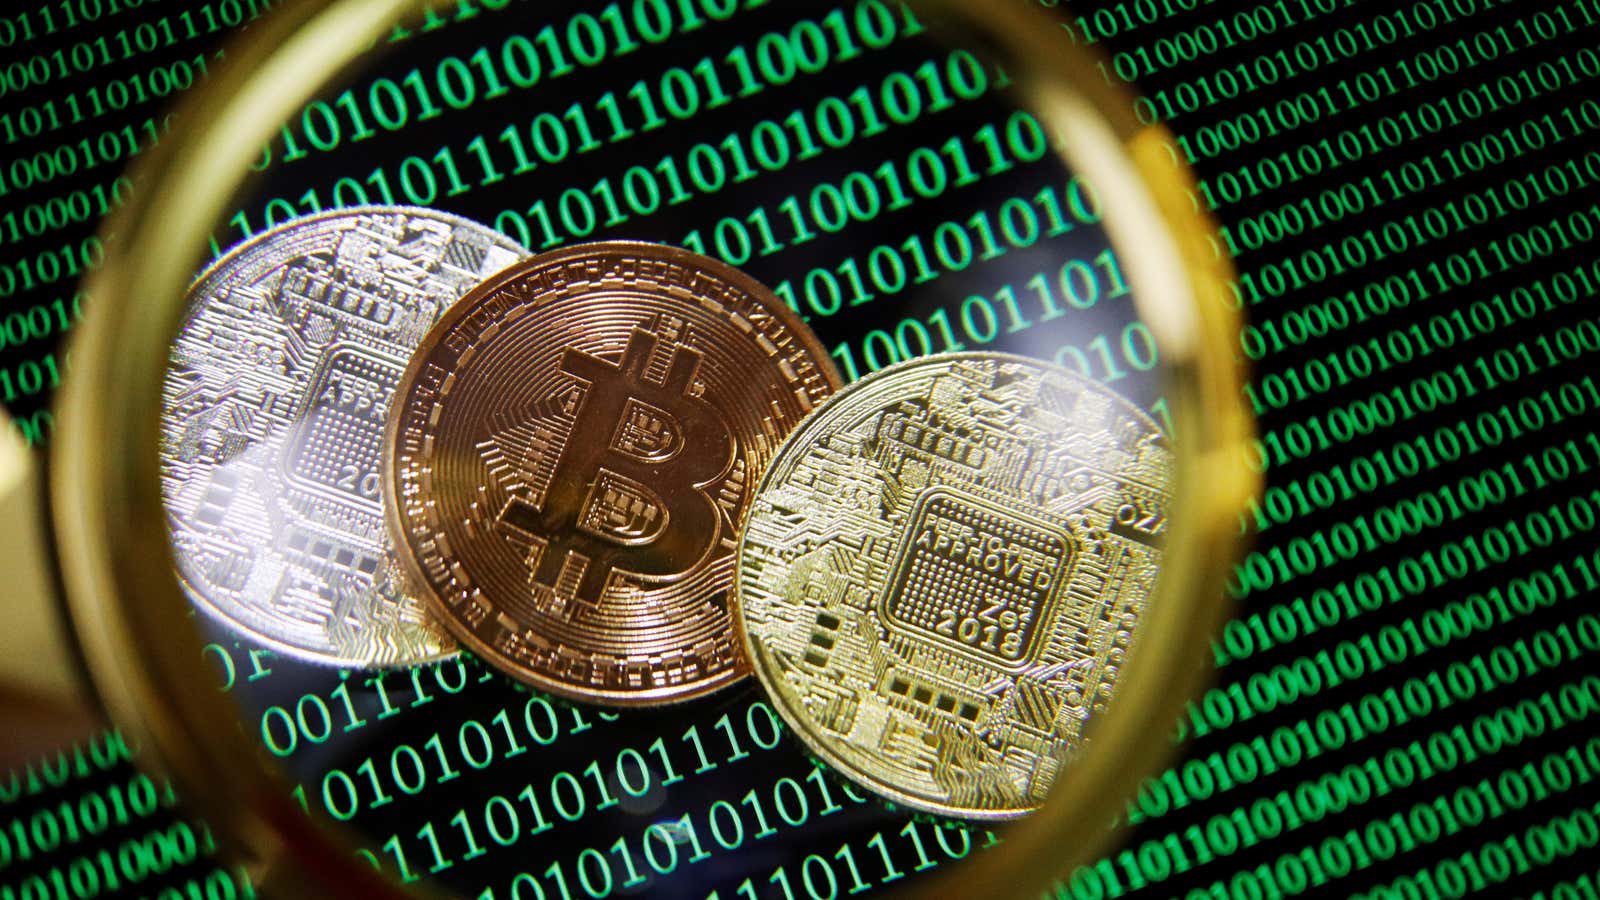 FILE PHOTO: Representations of Bitcoin and other cryptocurrencies on a screen showing binary codes are seen through a magnifying glass in this illustration picture taken…